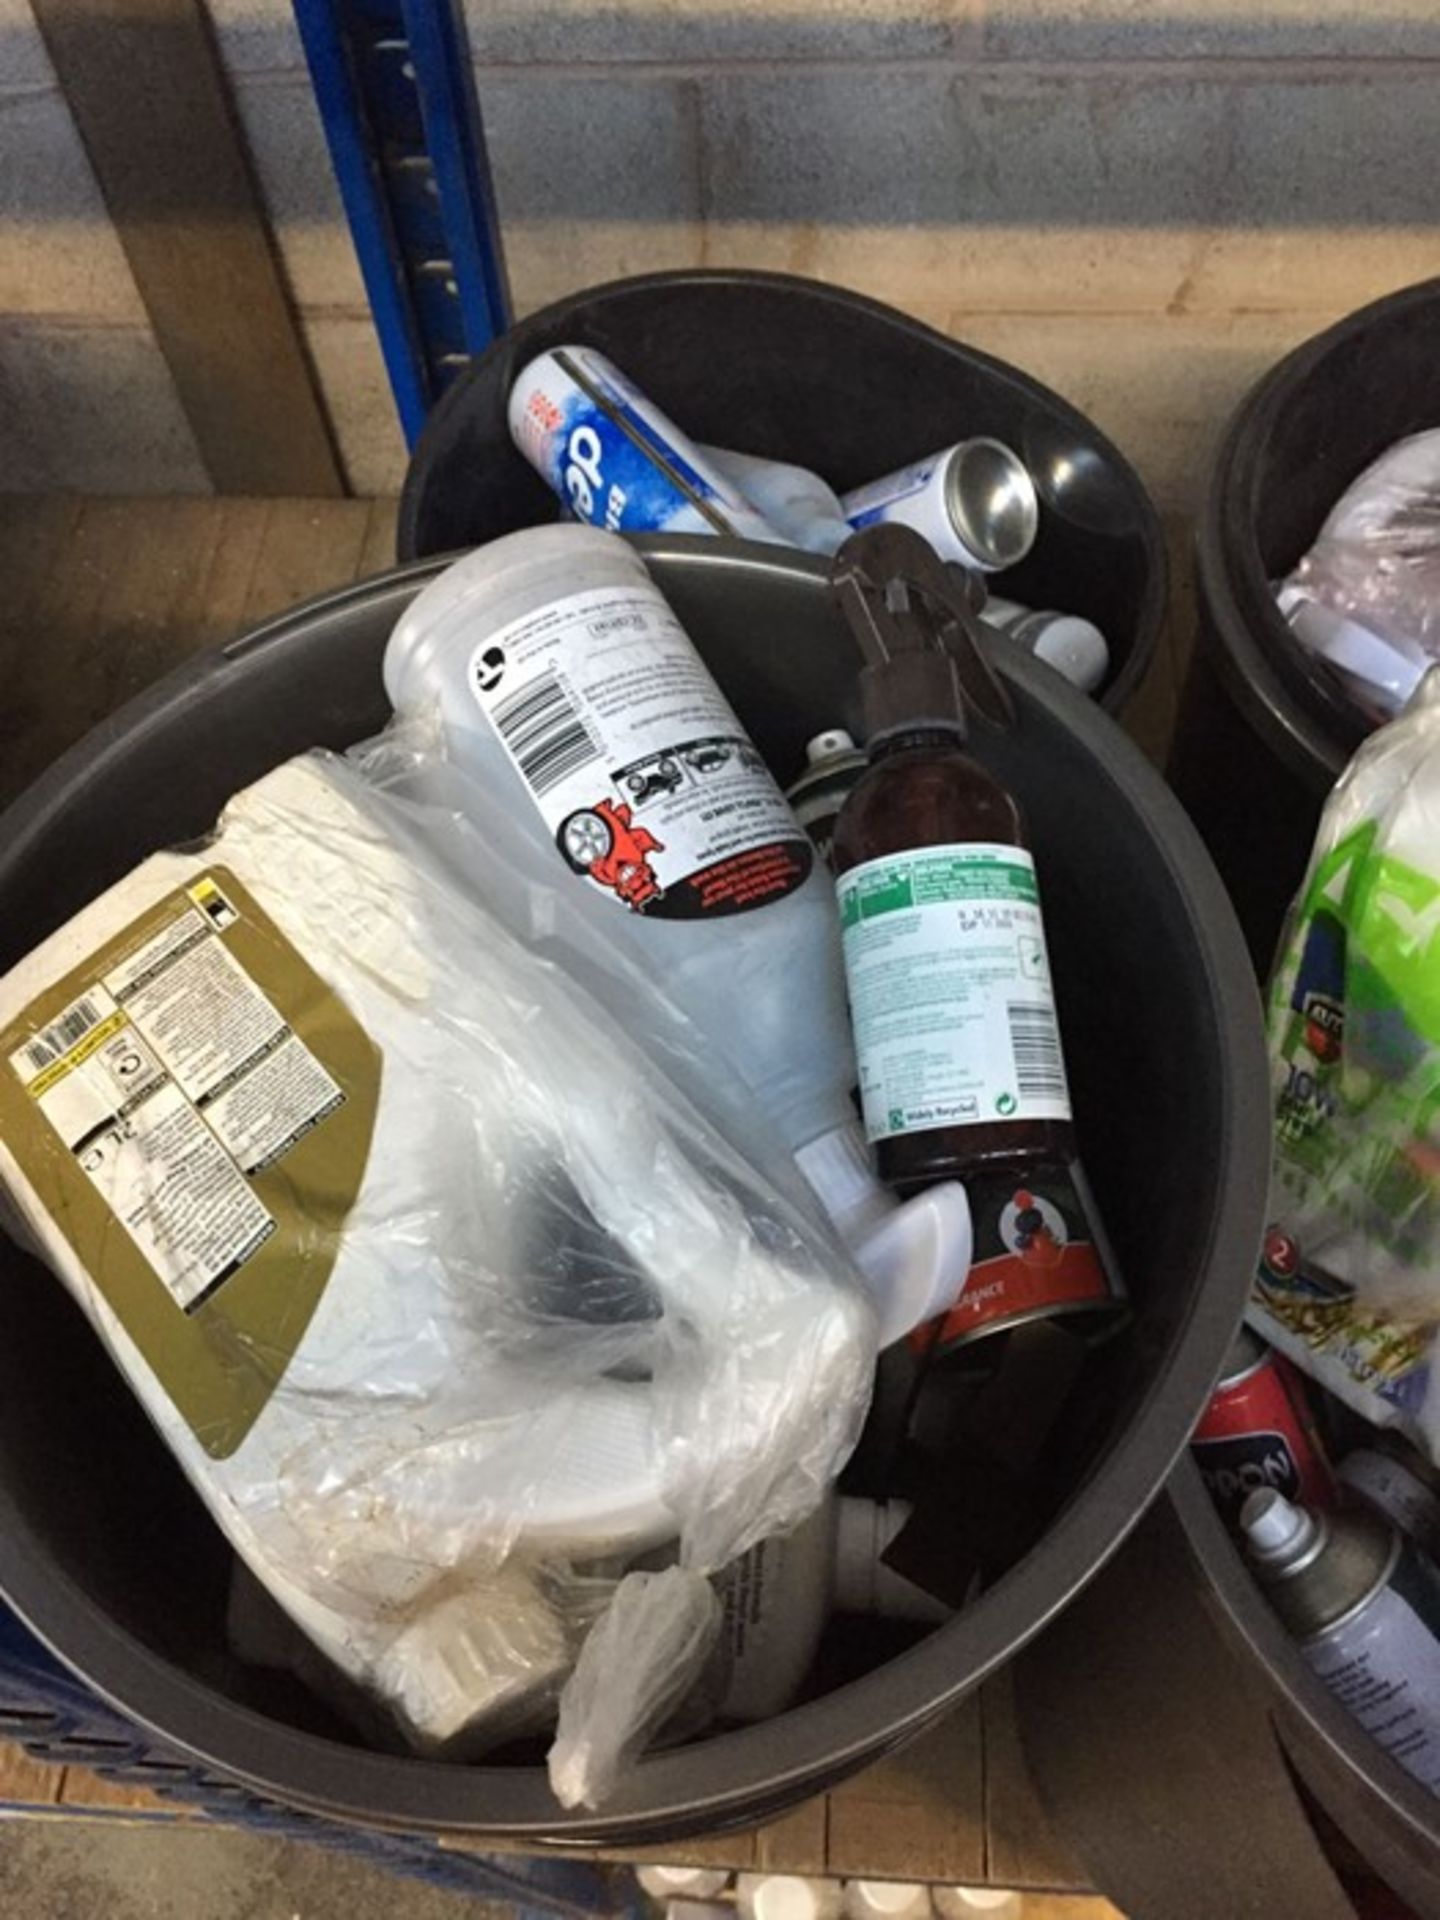 ONE LOT TO CONTAIN 2 LARGE TUBS OF CLEANING CHEMICALS (DE-ICER, CAR SHAMPOO AND MOTOR OILS) (